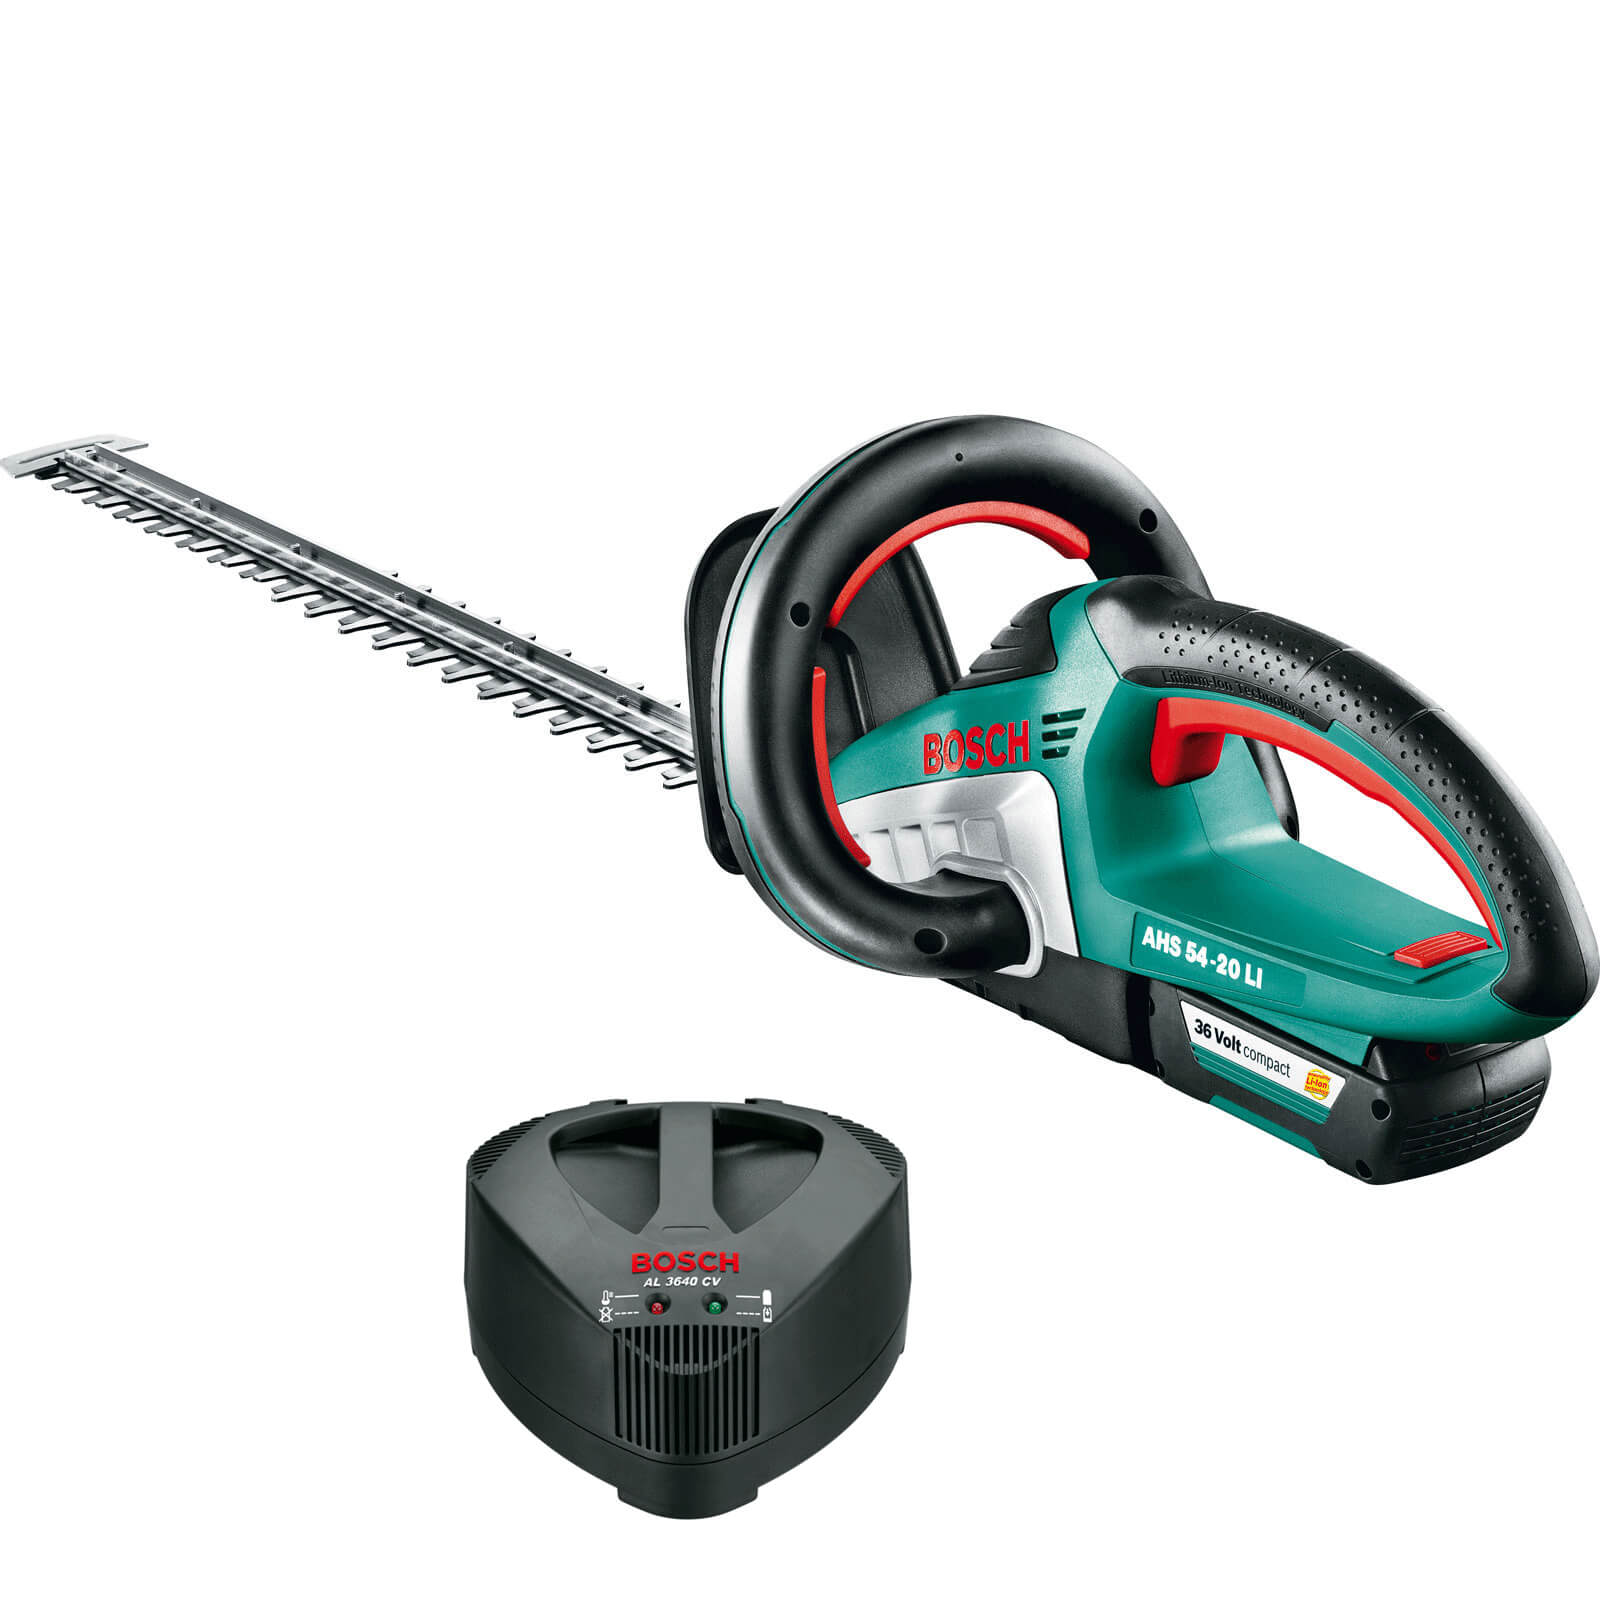 Bosch AHS 54-20 LI Cordless 36v Hedge Trimmer 540mm Blade Length + 1 Lithium Ion Battery Plus FREE Protective Glasses, Clippings Sheet & Spray Worth £22.97